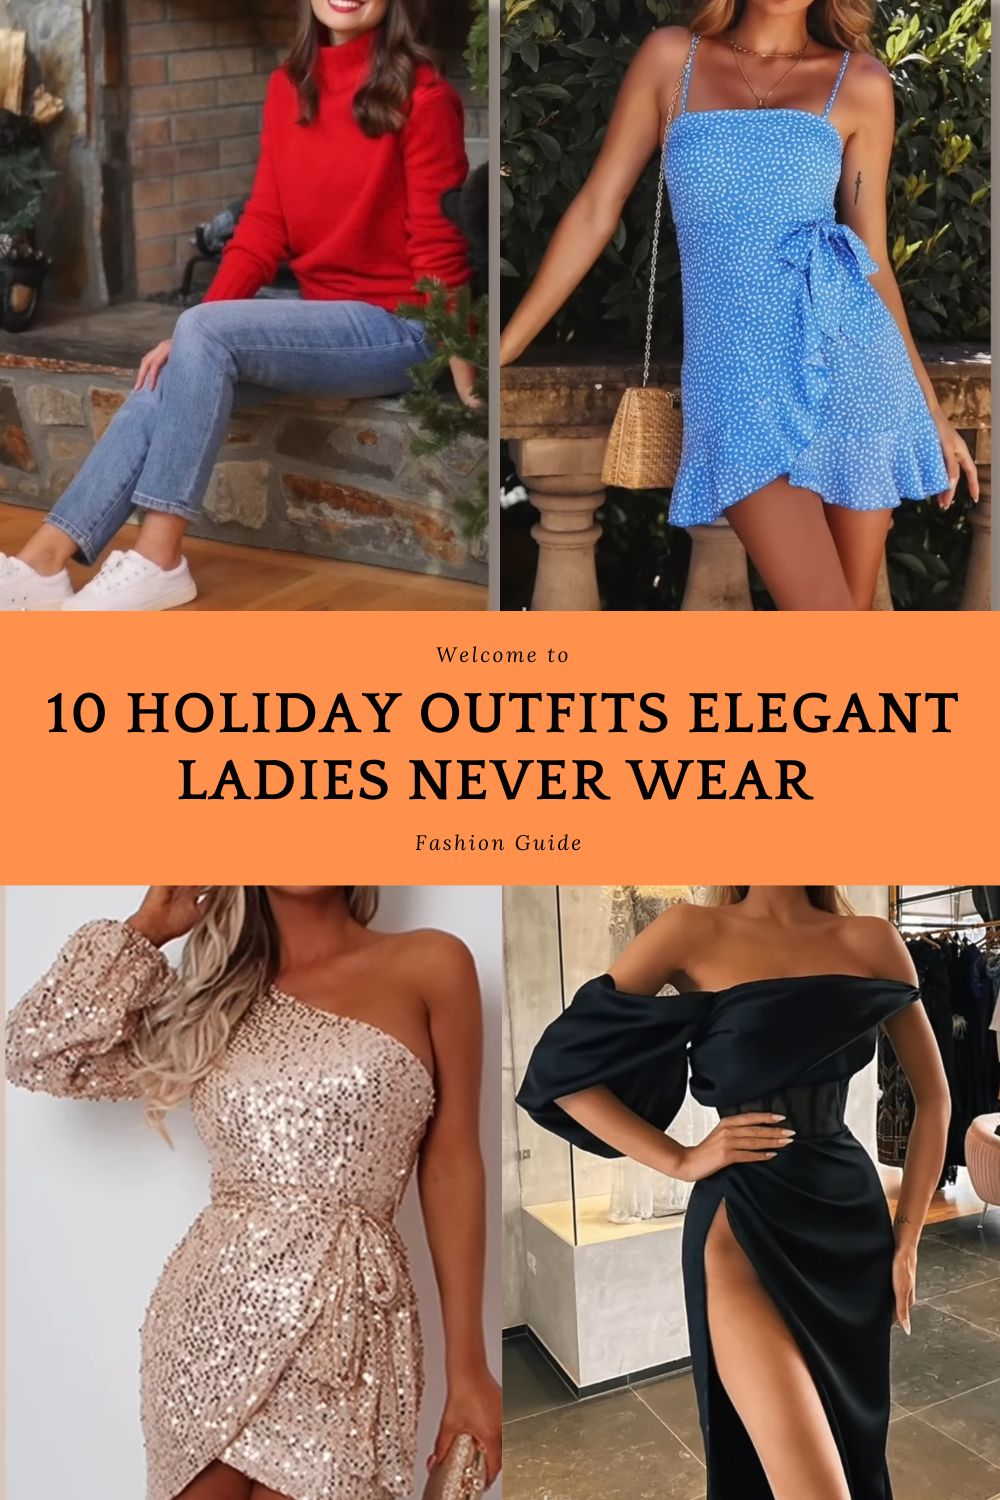 10 Uncomfortable Holiday Outfits Elegant Ladies Never Wear | People Choice